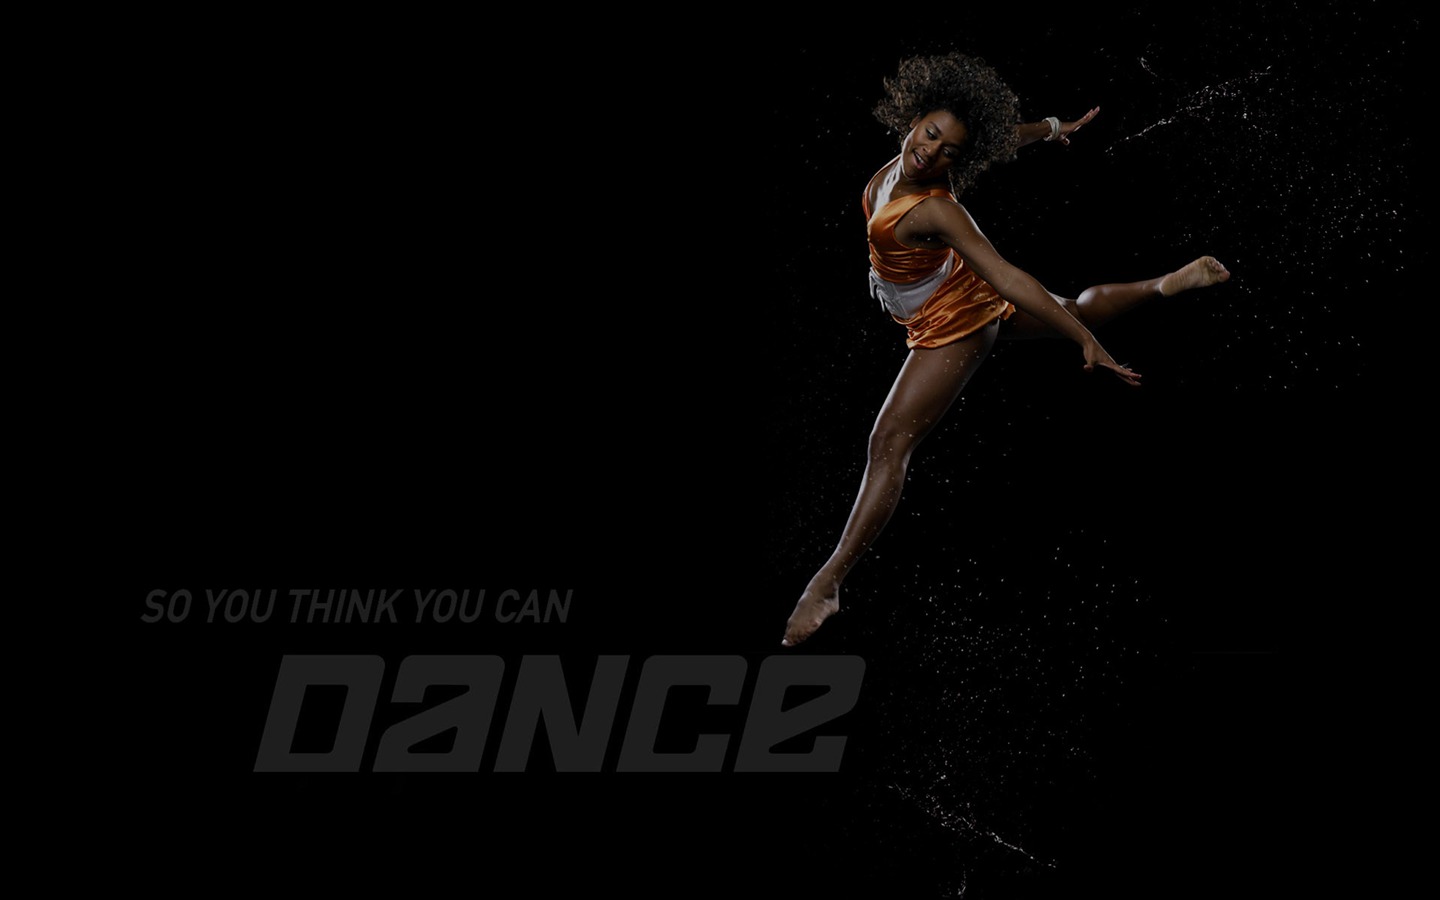 So You Think You Can Dance 舞林争霸 壁纸(二)7 - 1440x900